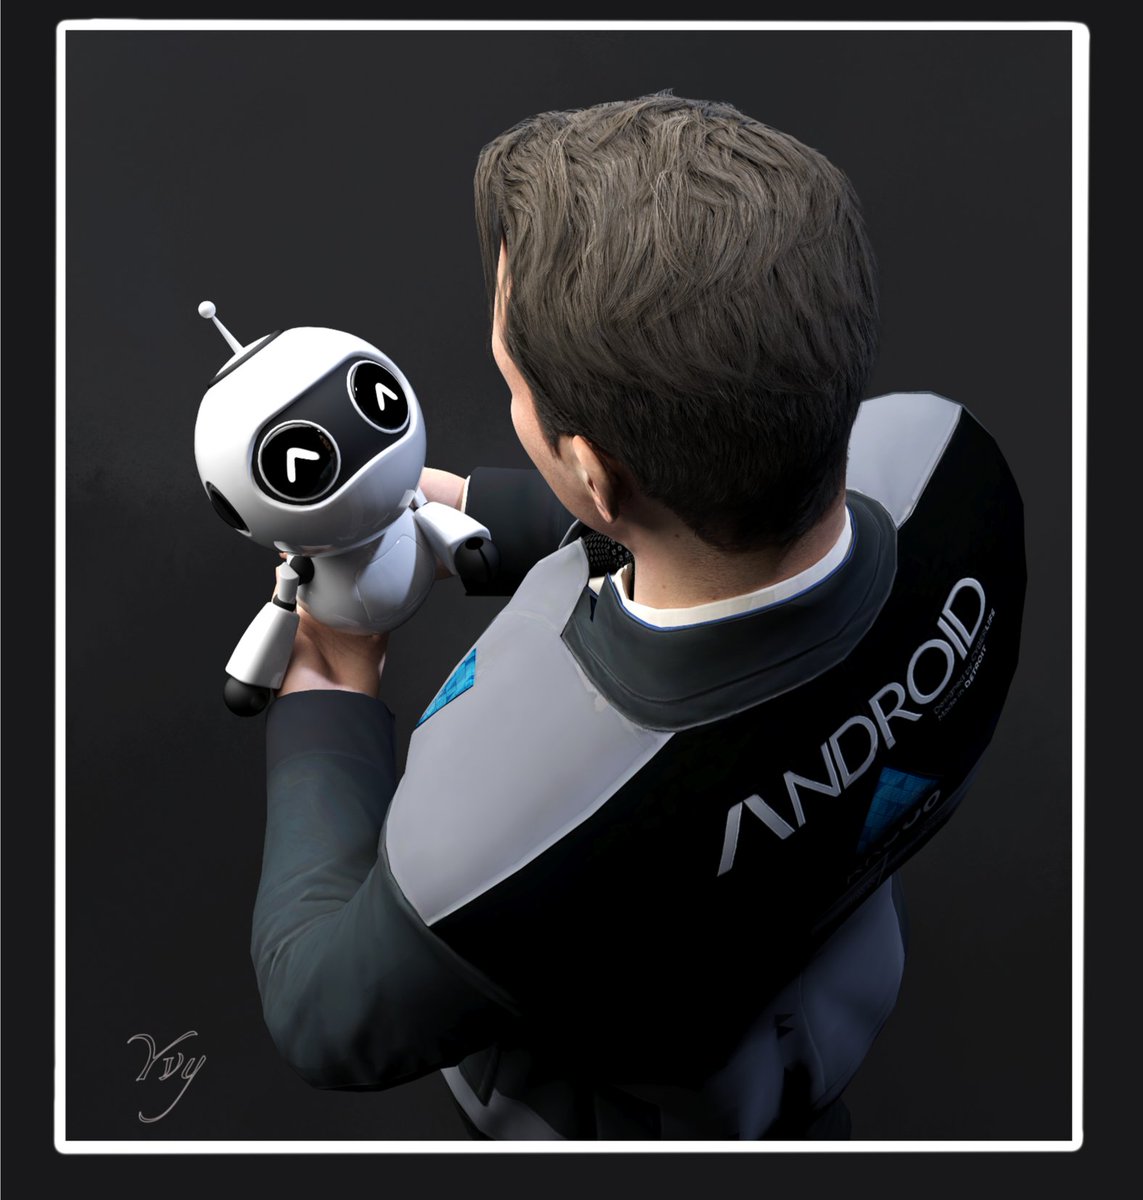 A new friend for Connor 👀💙 #DetroitBecomeHuman #connordbh #dbhconnor #tinybot #3dart #3drender #Daz3D Connor model ported by metoria on twitter